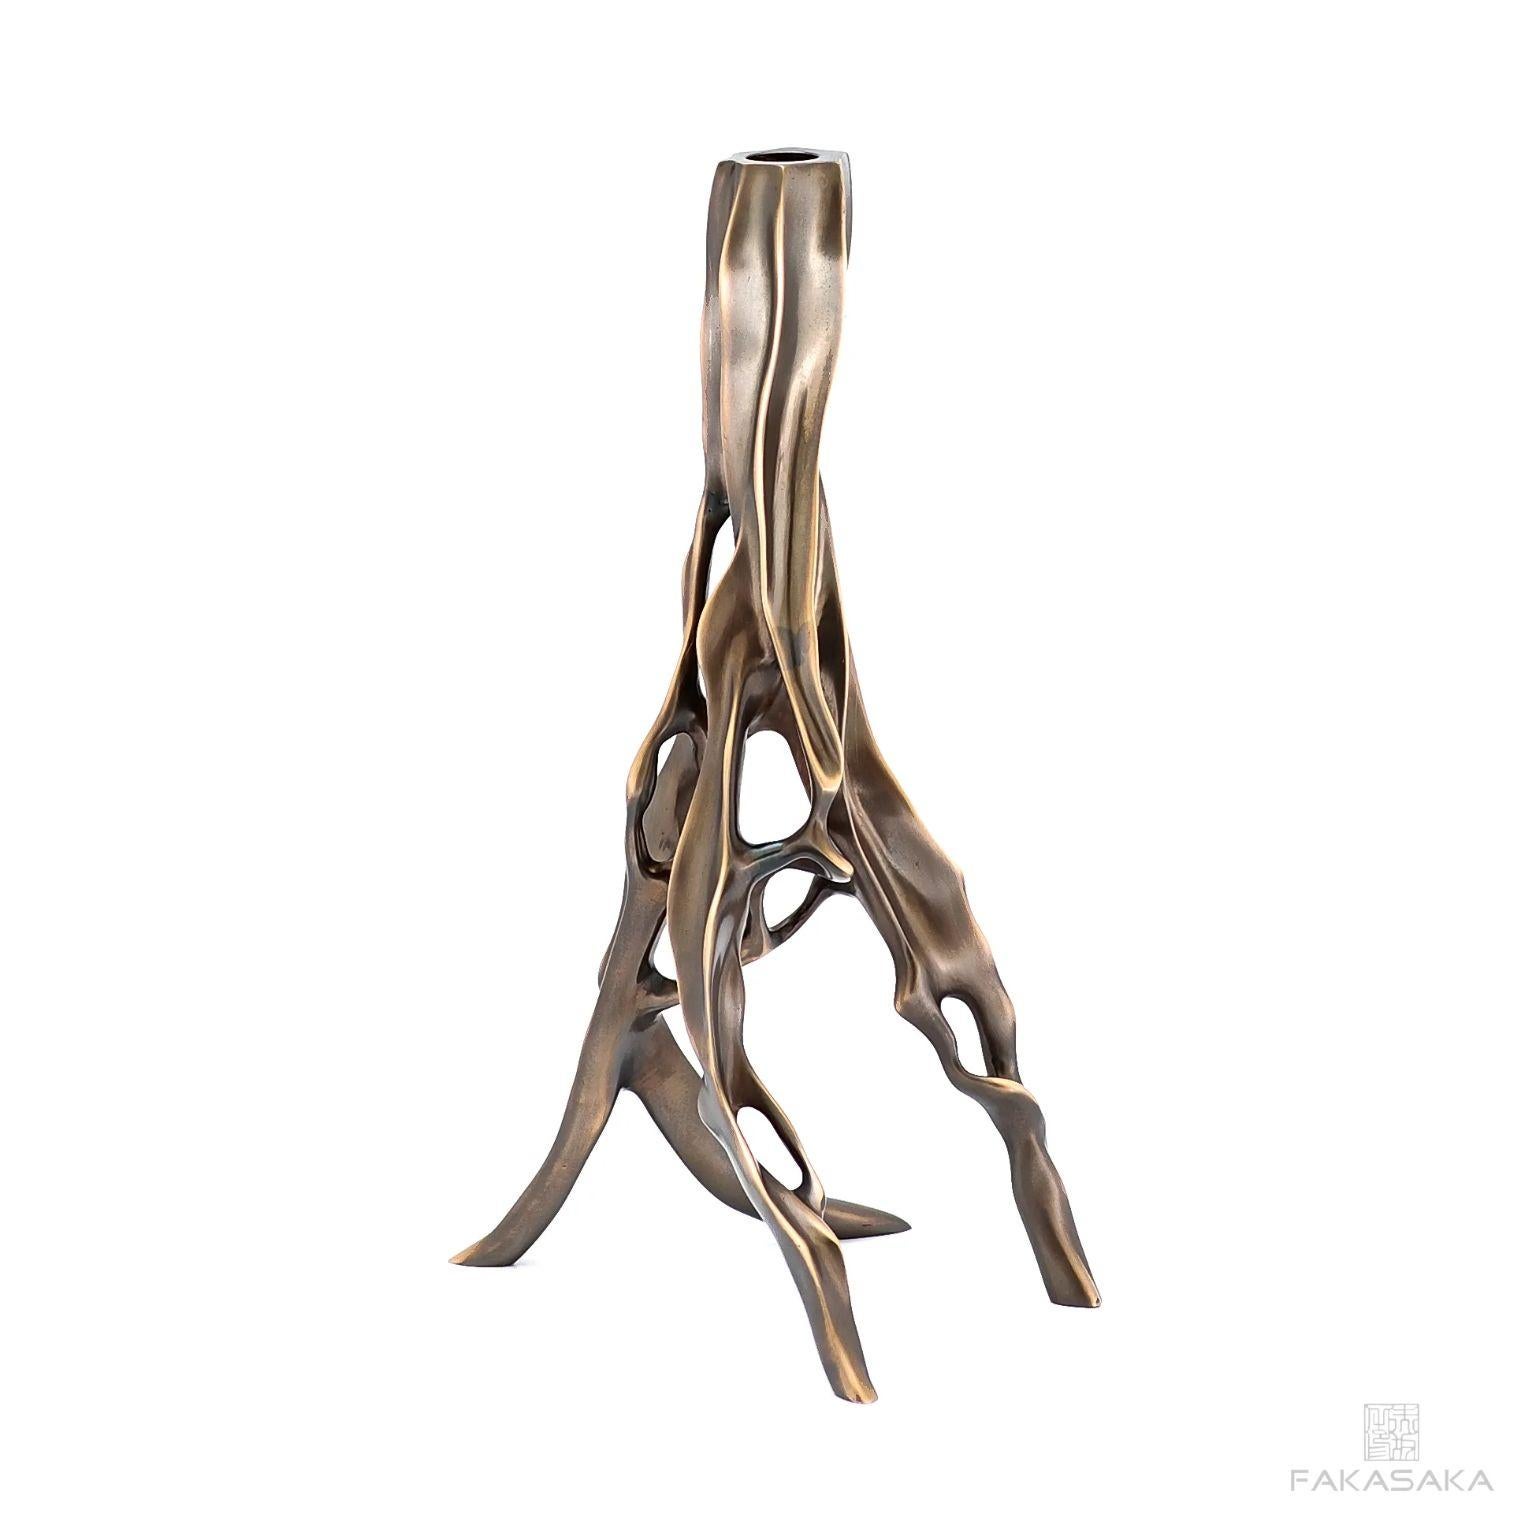 Alexia candleholder by Fakasaka Design.
Dimensions: W 20 cm D 19 cm H 30.5 cm.
Materials: dark bronze.
Also available in polished bronze.

 FAKASAKA is a design company focused on production of high-end furniture, lighting, decorative objects,